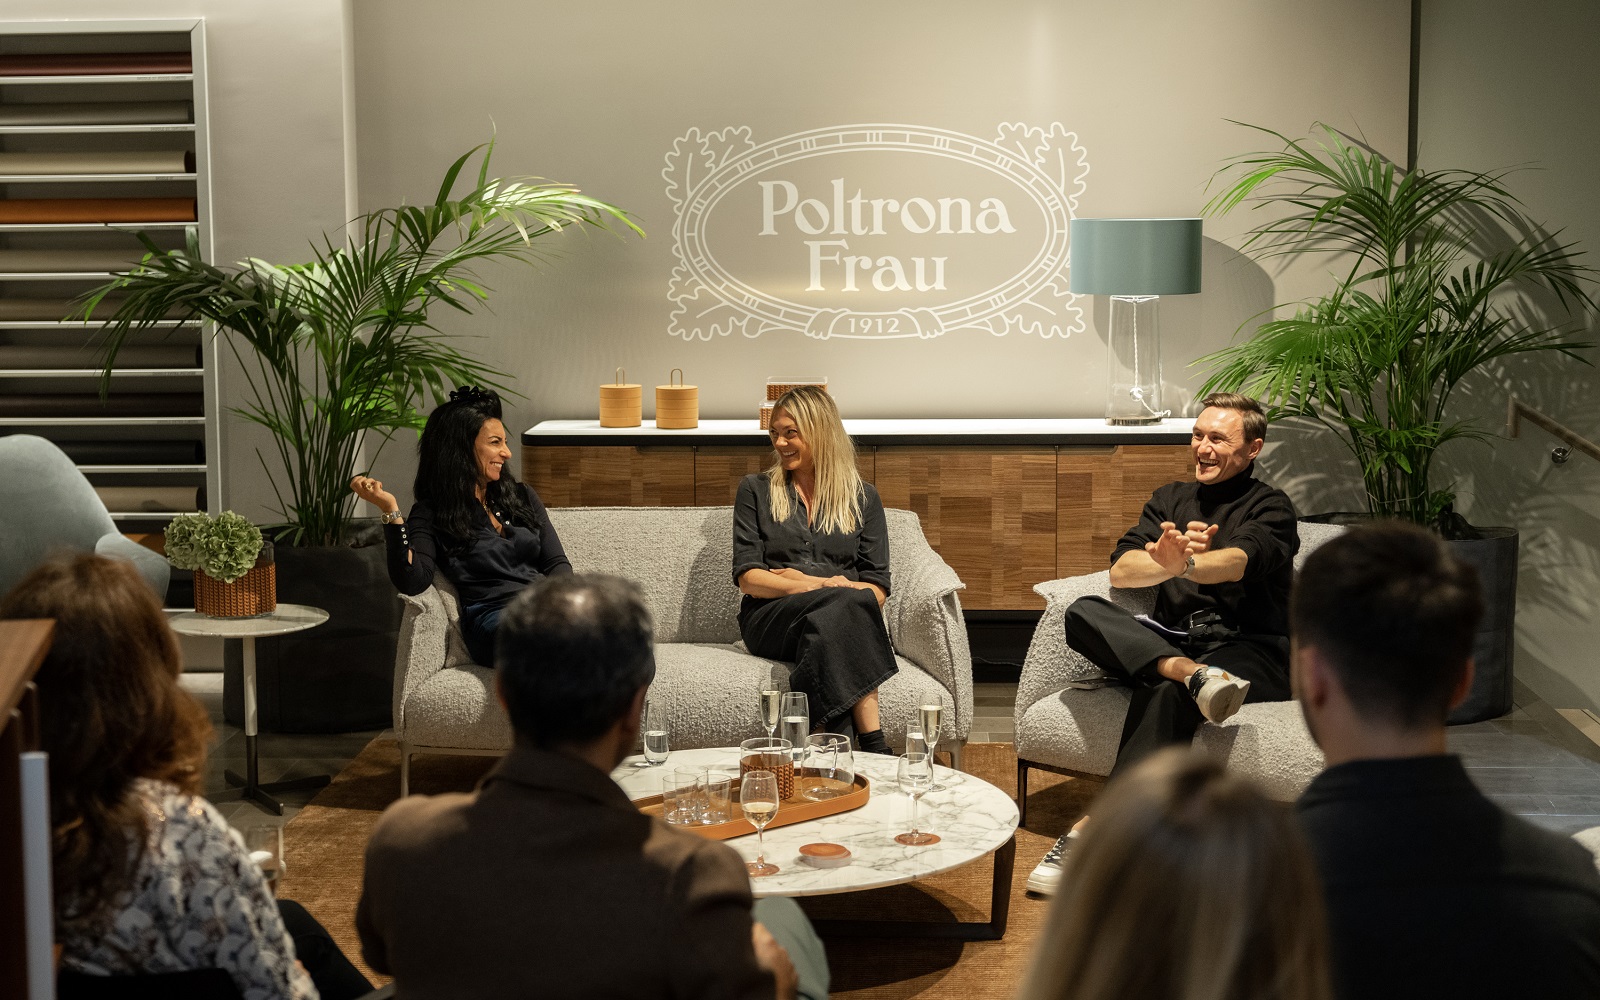 Panel discussion at Poltrona Frau with Hamish Kilburn, Jessica Morrison and Marie Soliman